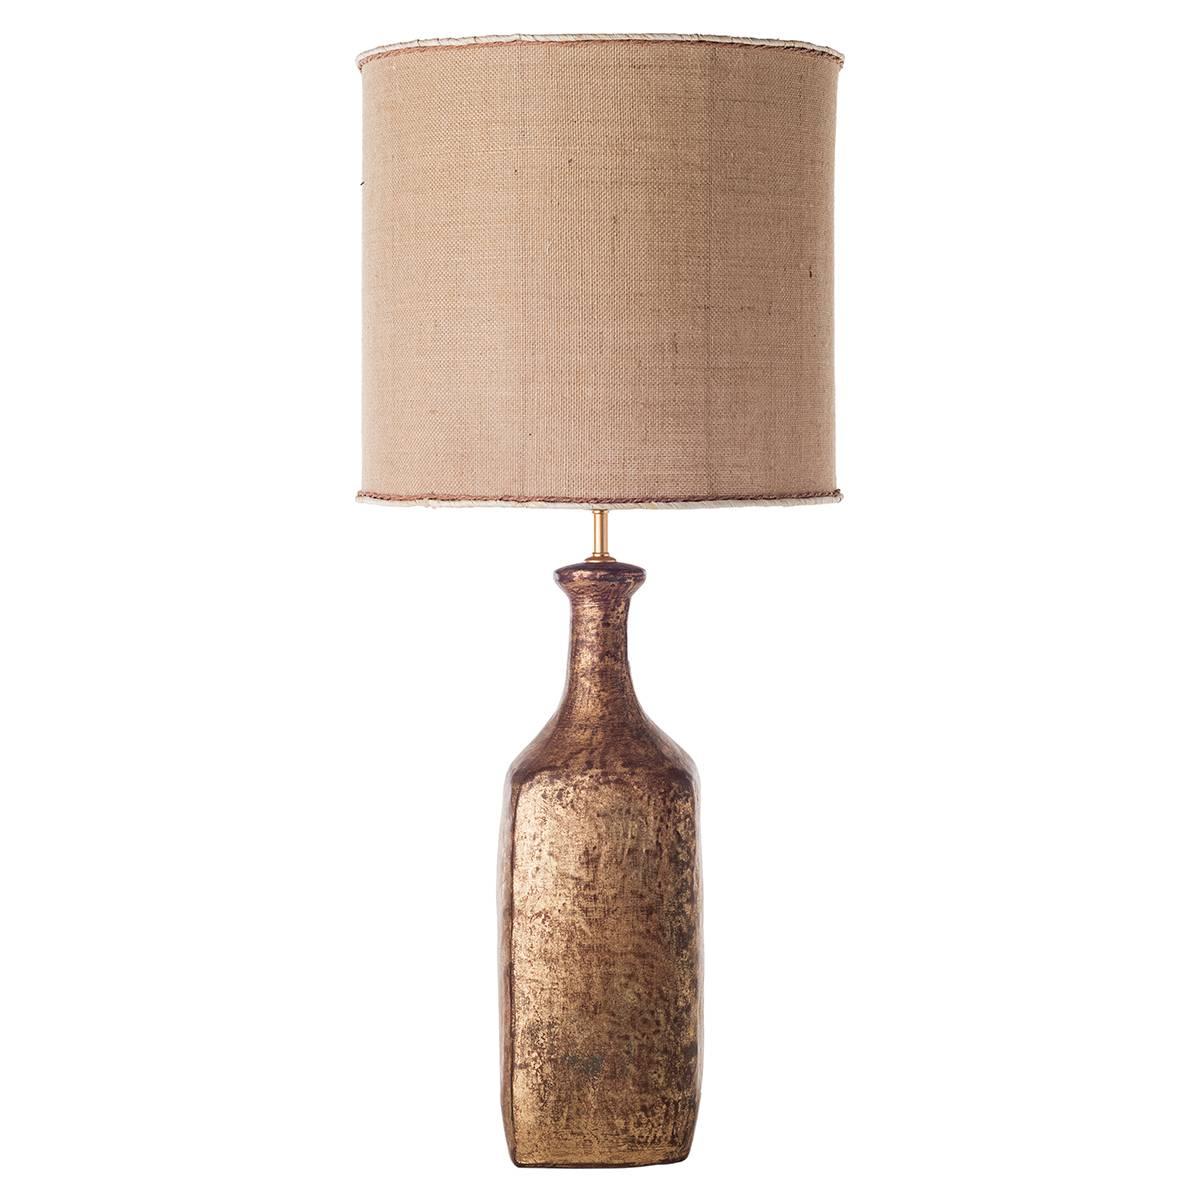 Bottle ceramic table lamps with shades.
The body of the lamps is characterized by a bottle shape and is decorated with a refined rusty-brown finish. The table lamps are completed by a cylindrical shade in sand color. Warm and rustic colors make them